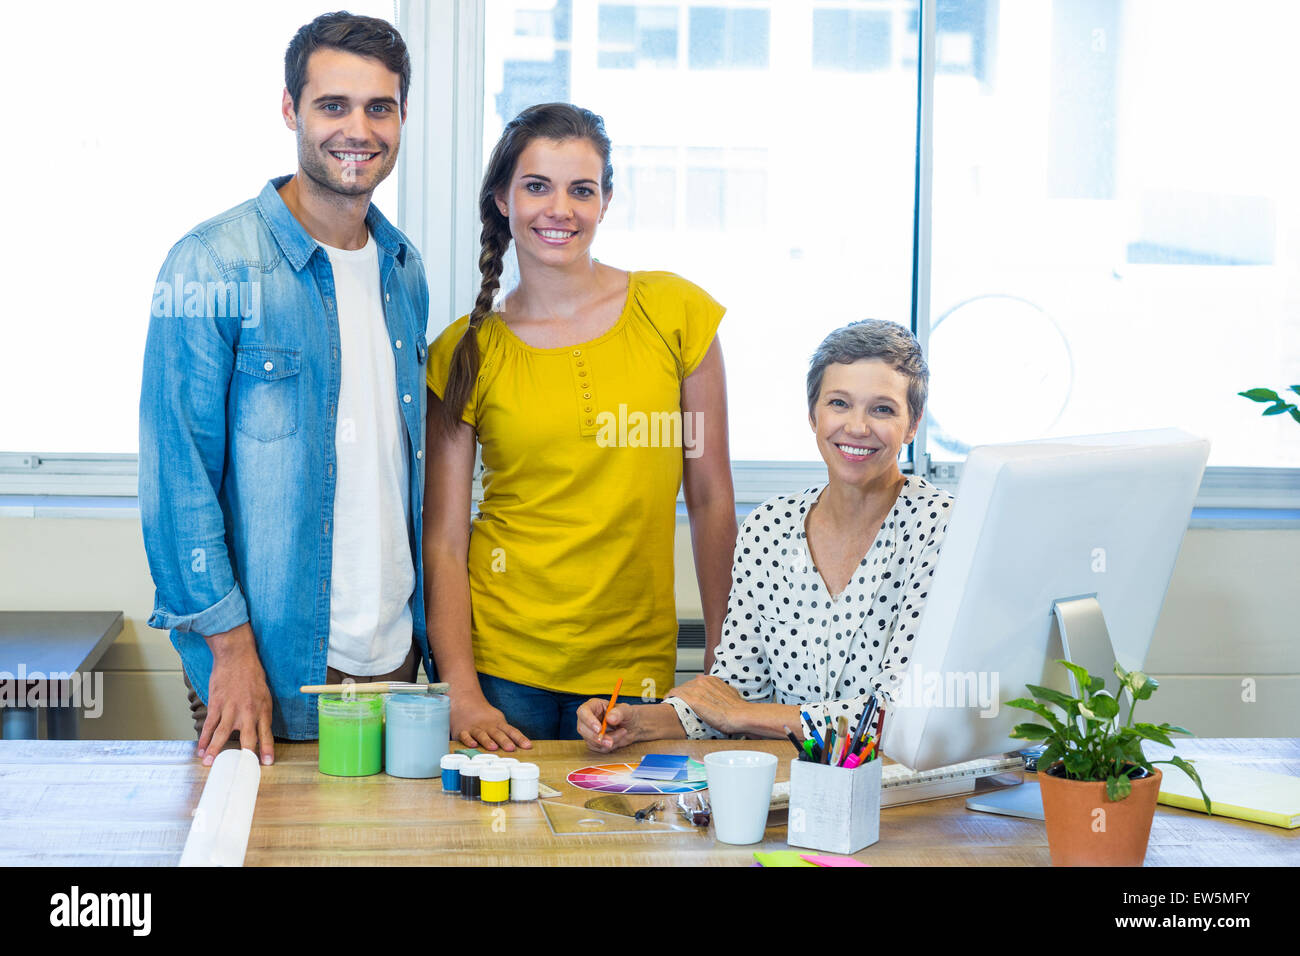 Casual business team smiling at camera during meeting Stock Photo